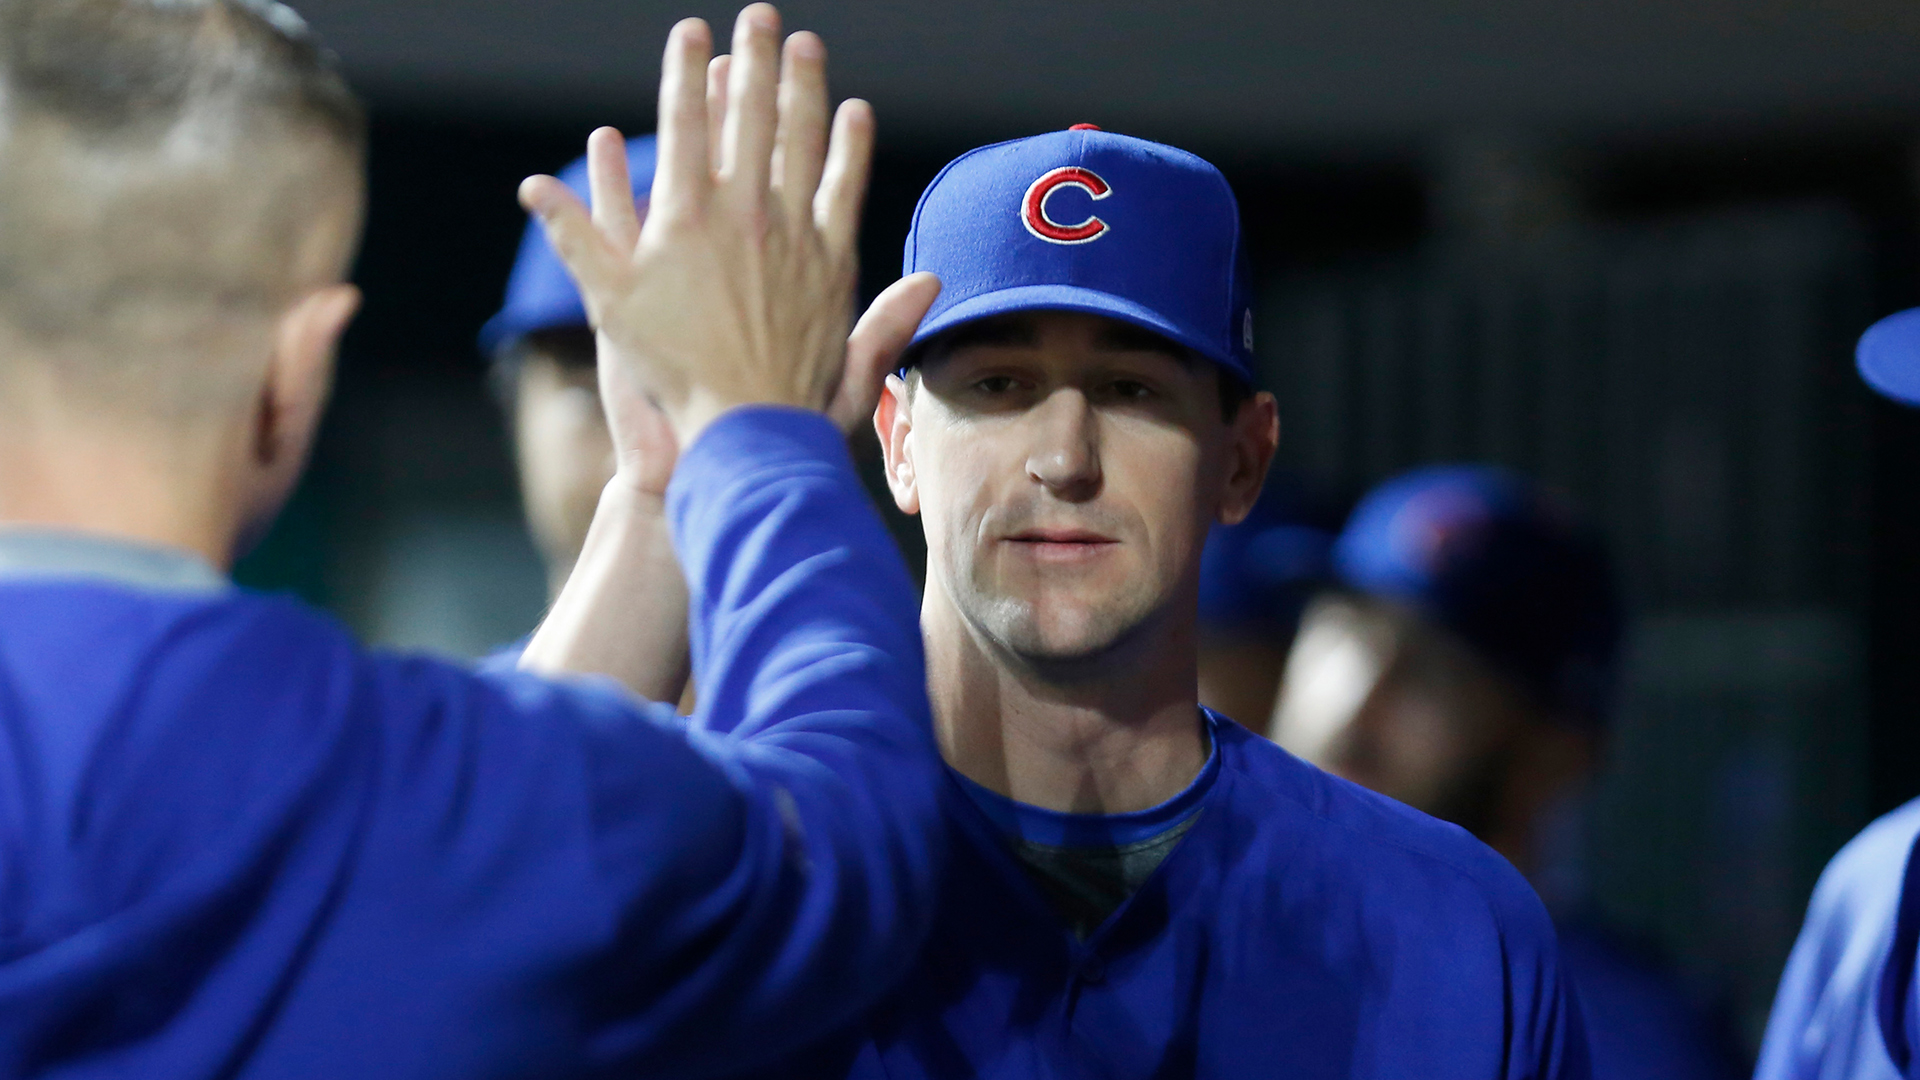 Kyle Hendricks expecting new cub, wife shares baby announcement – NBC  Sports Chicago